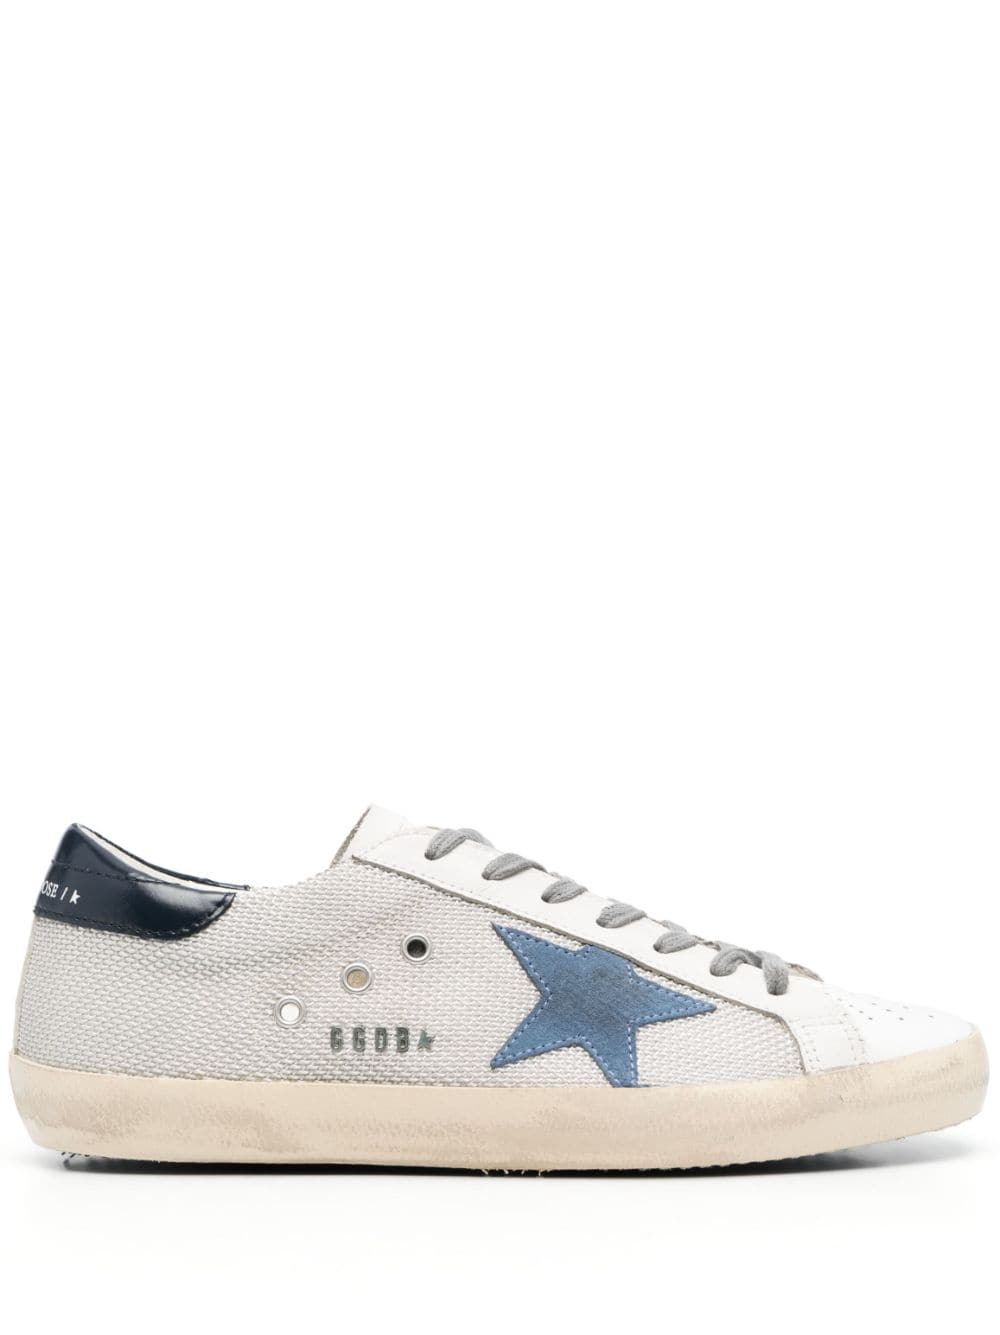 Image 1 of Golden Goose Super-Star leather sneakers